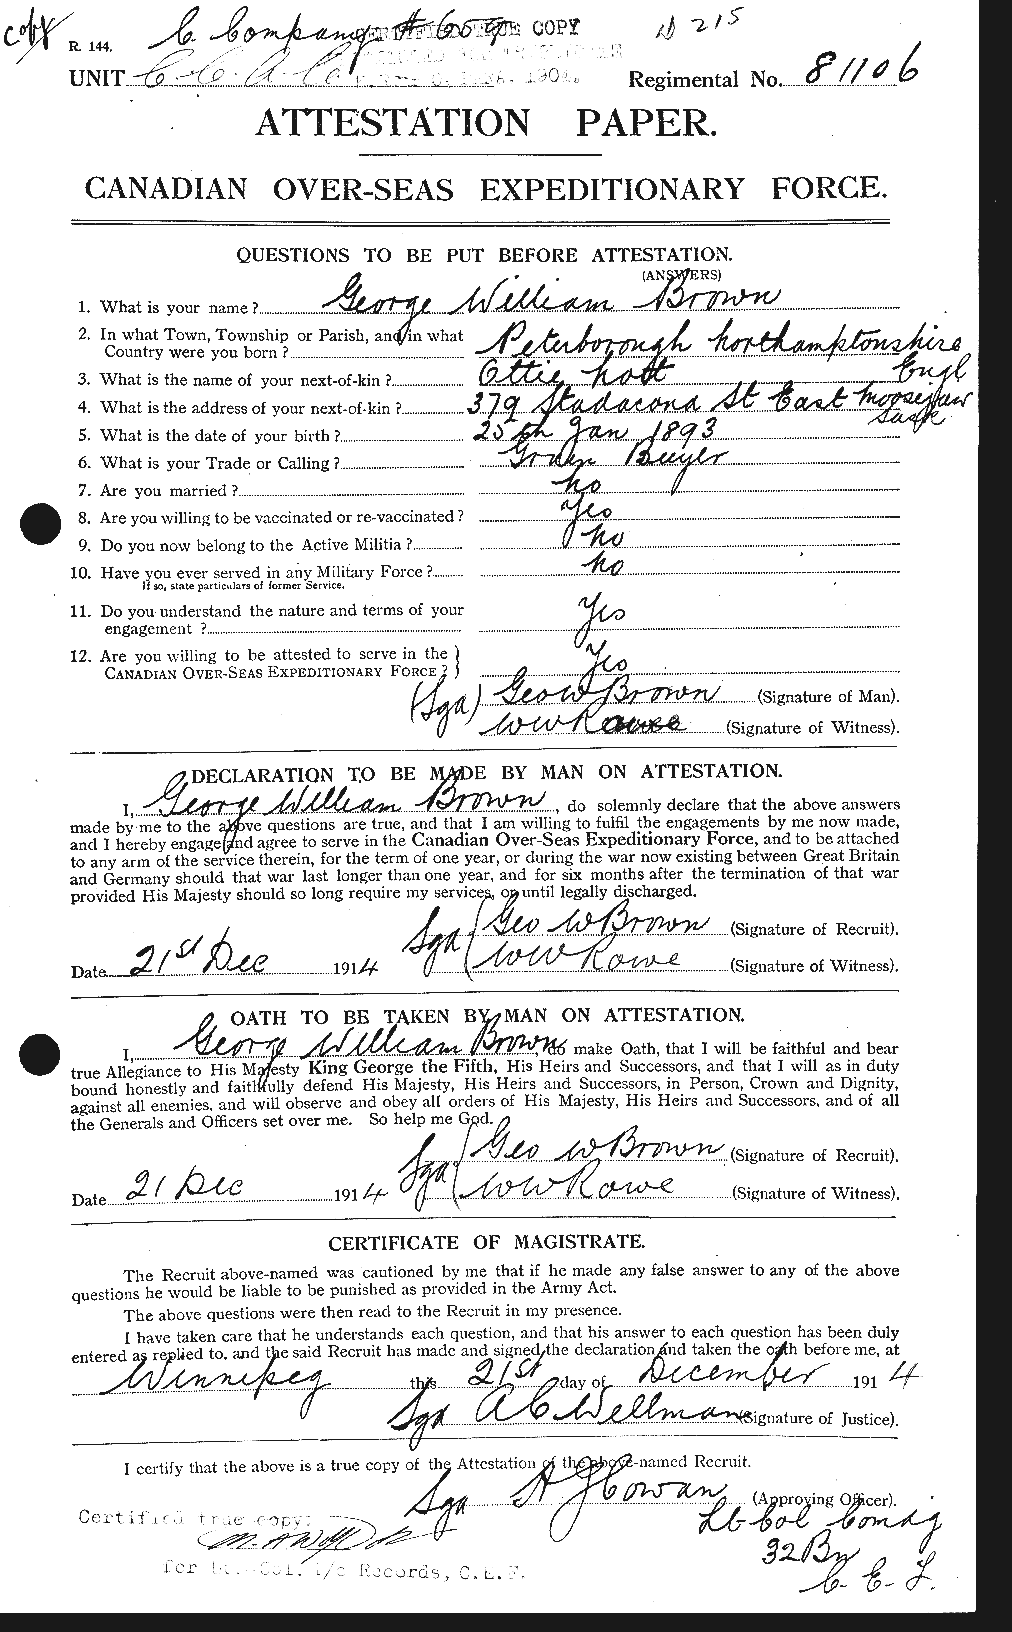 Personnel Records of the First World War - CEF 262594a